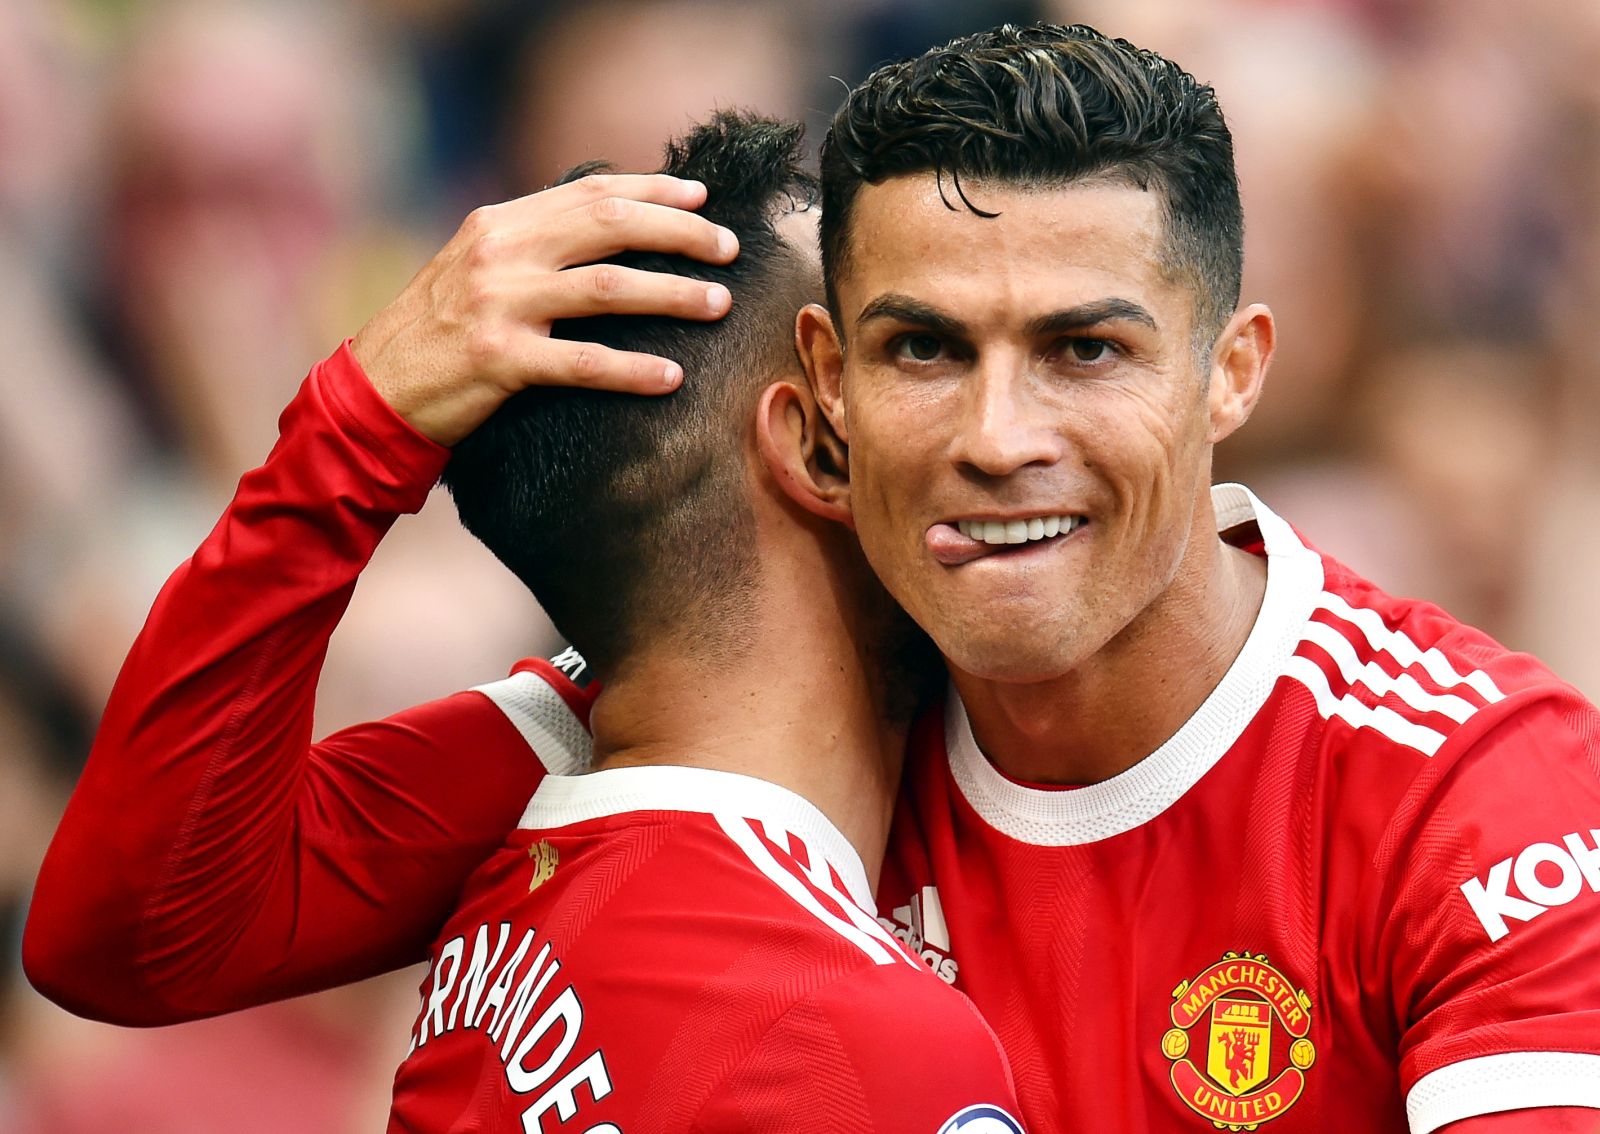 epa09620895 Bruno Fernandes of Manchester United (L) is being congratulated by teammate Cristiano Ronaldo after scoring his team's third goal during the English Premier League soccer match between Manchester United and Newcastle United in Manchester, Britain, 11 September 2021.  EPA/PETER POWELL EDITORIAL USE ONLY *** Local Caption *** 57166936